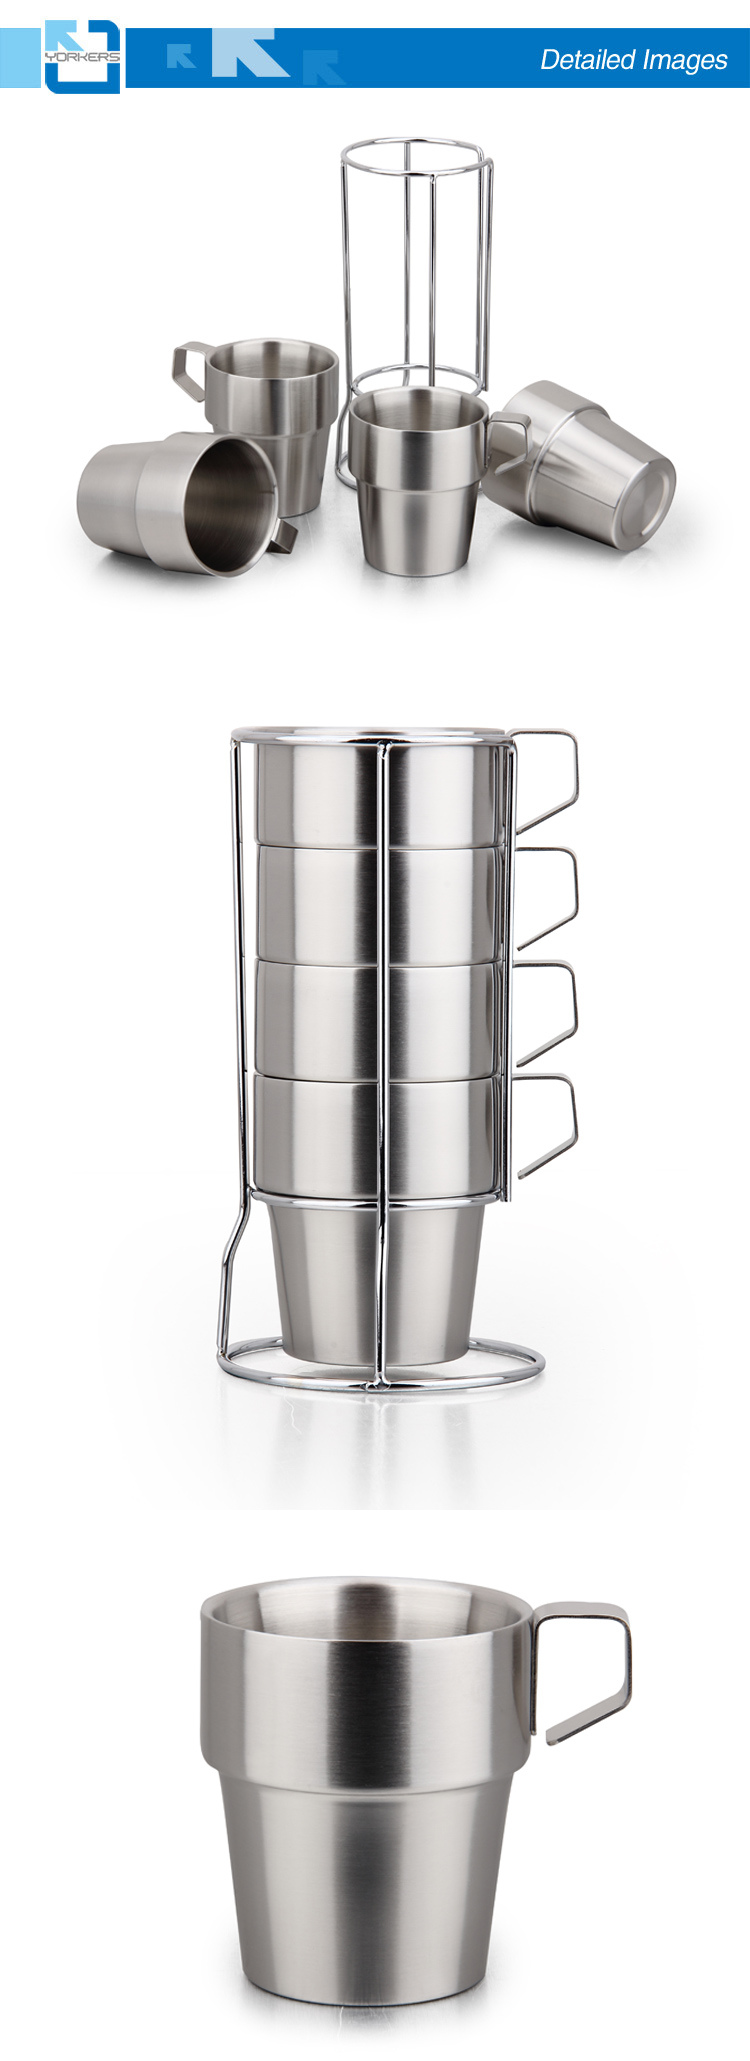 Hot Sale Stainless Steel Tea Cup Sets / Ice Cream Cup